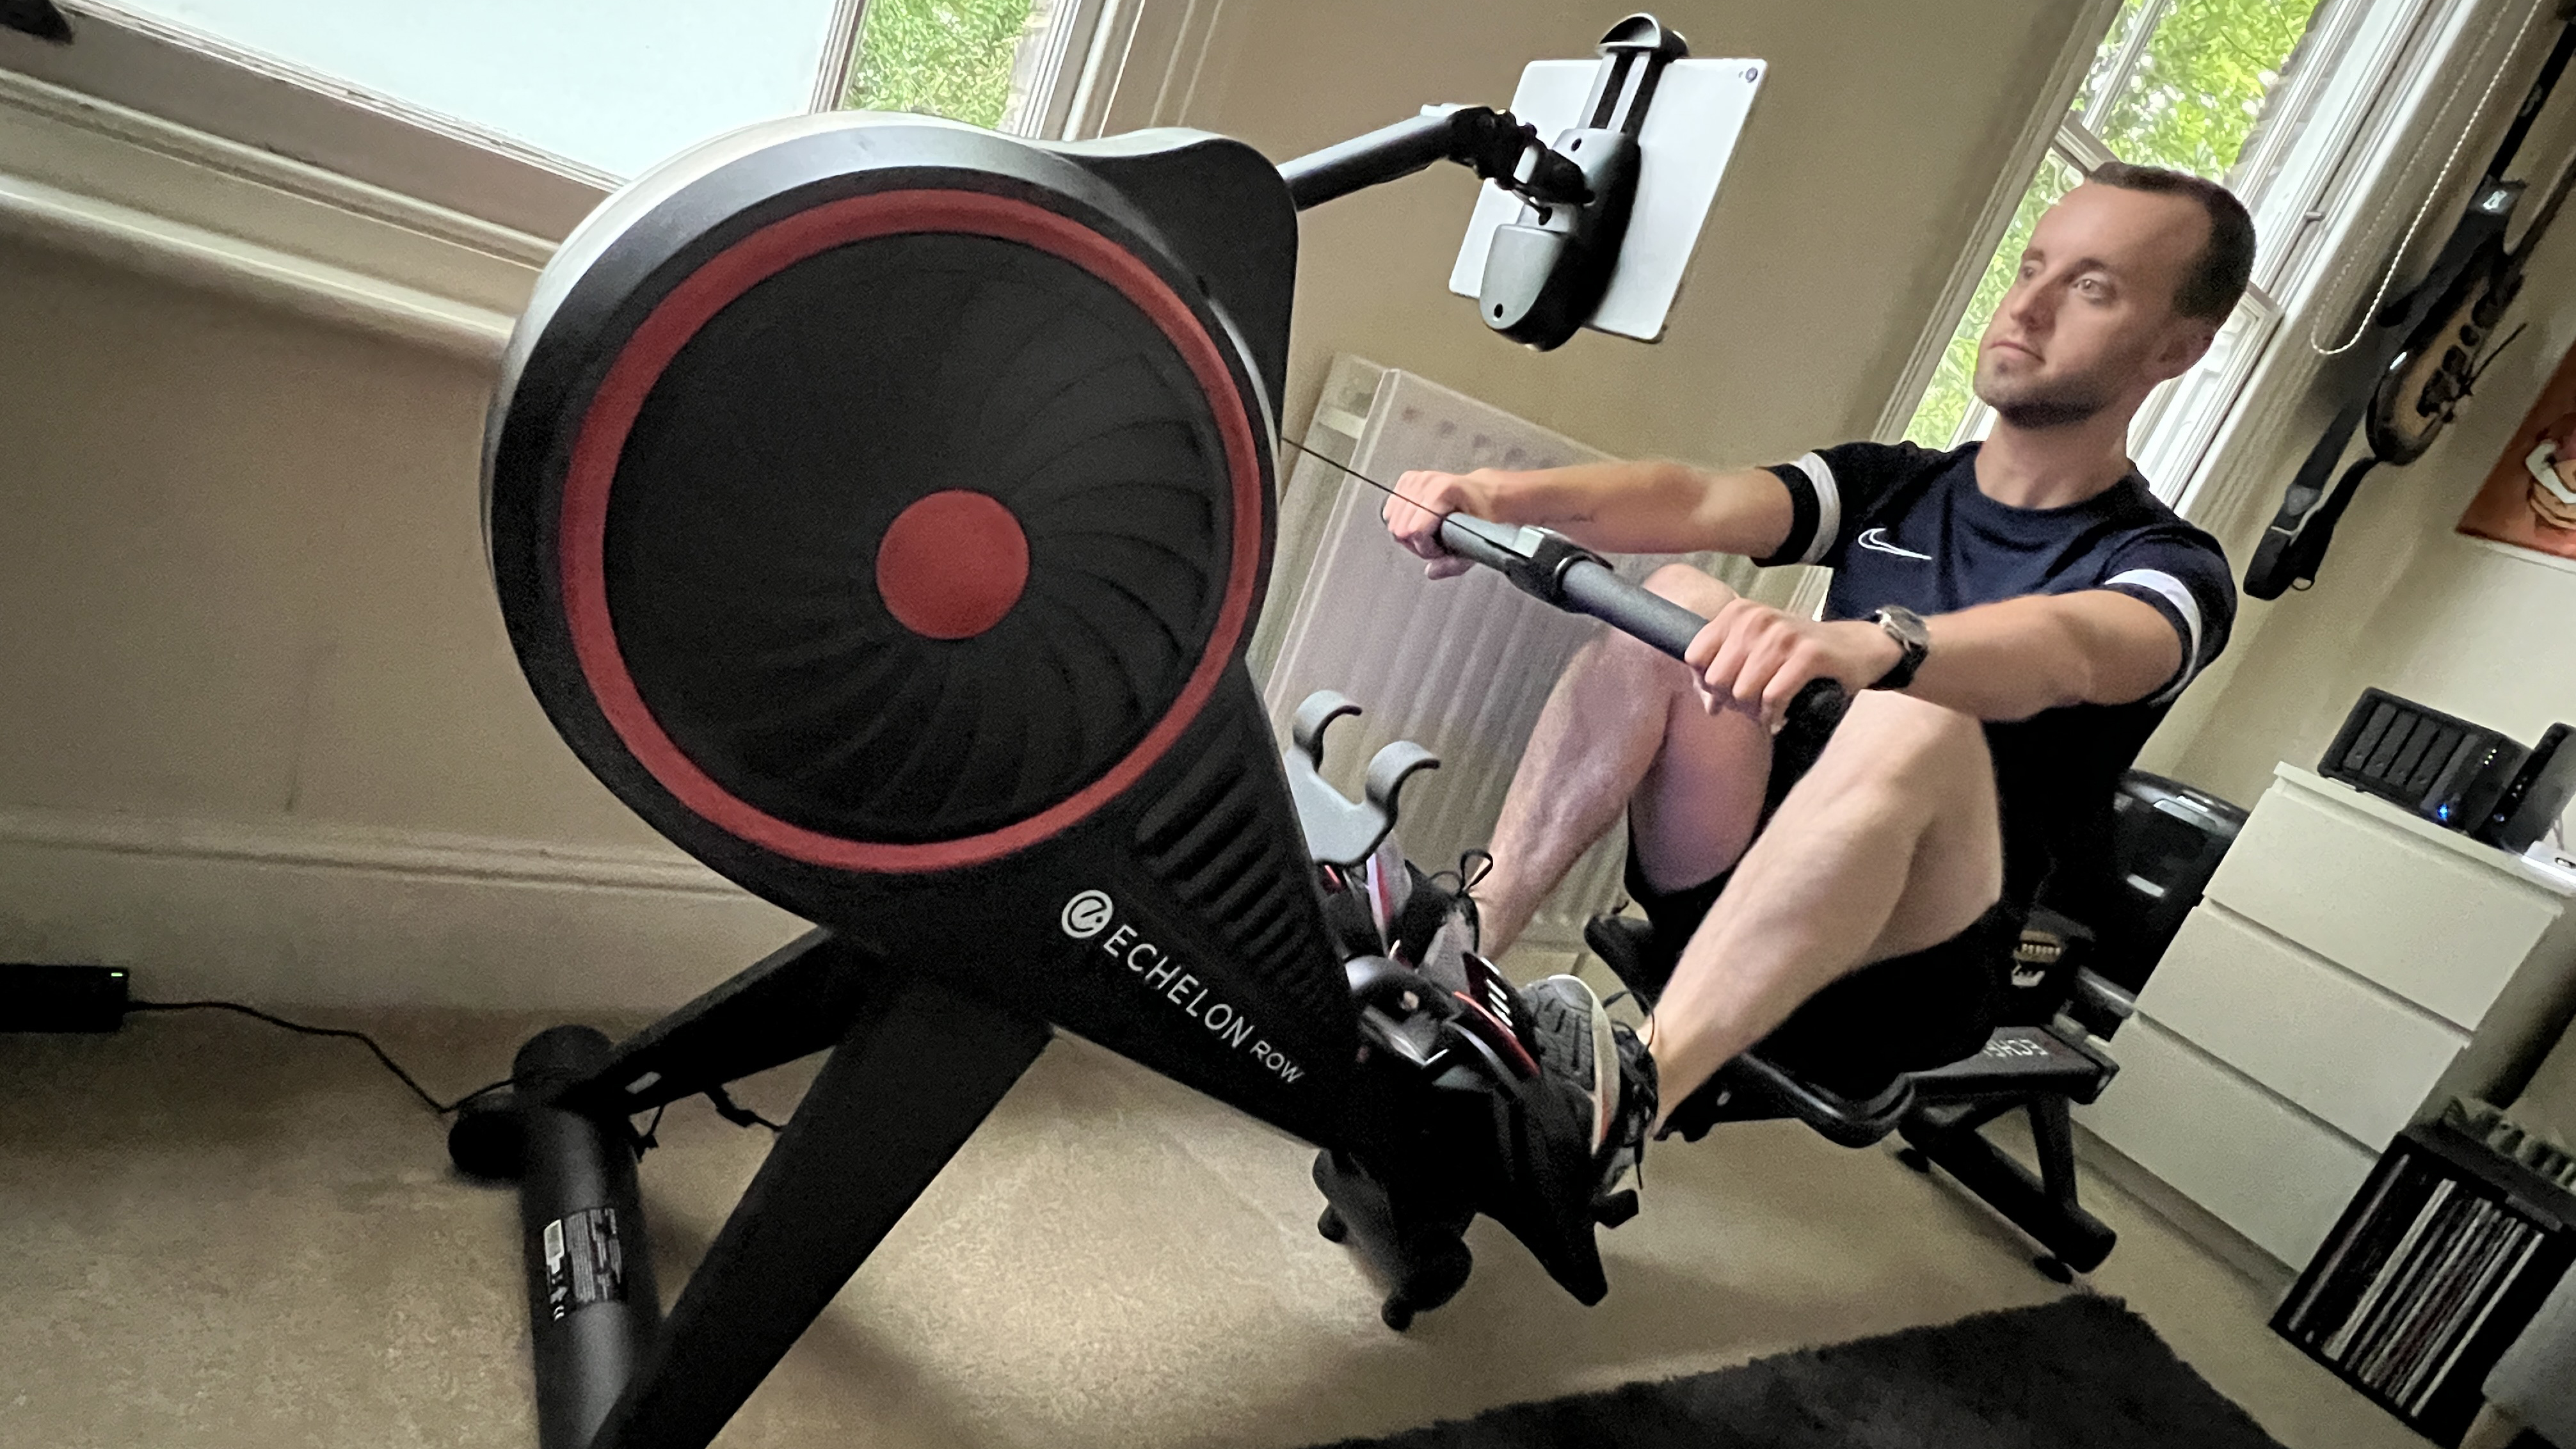 Echelon Smart Rower is being tested on Live Science